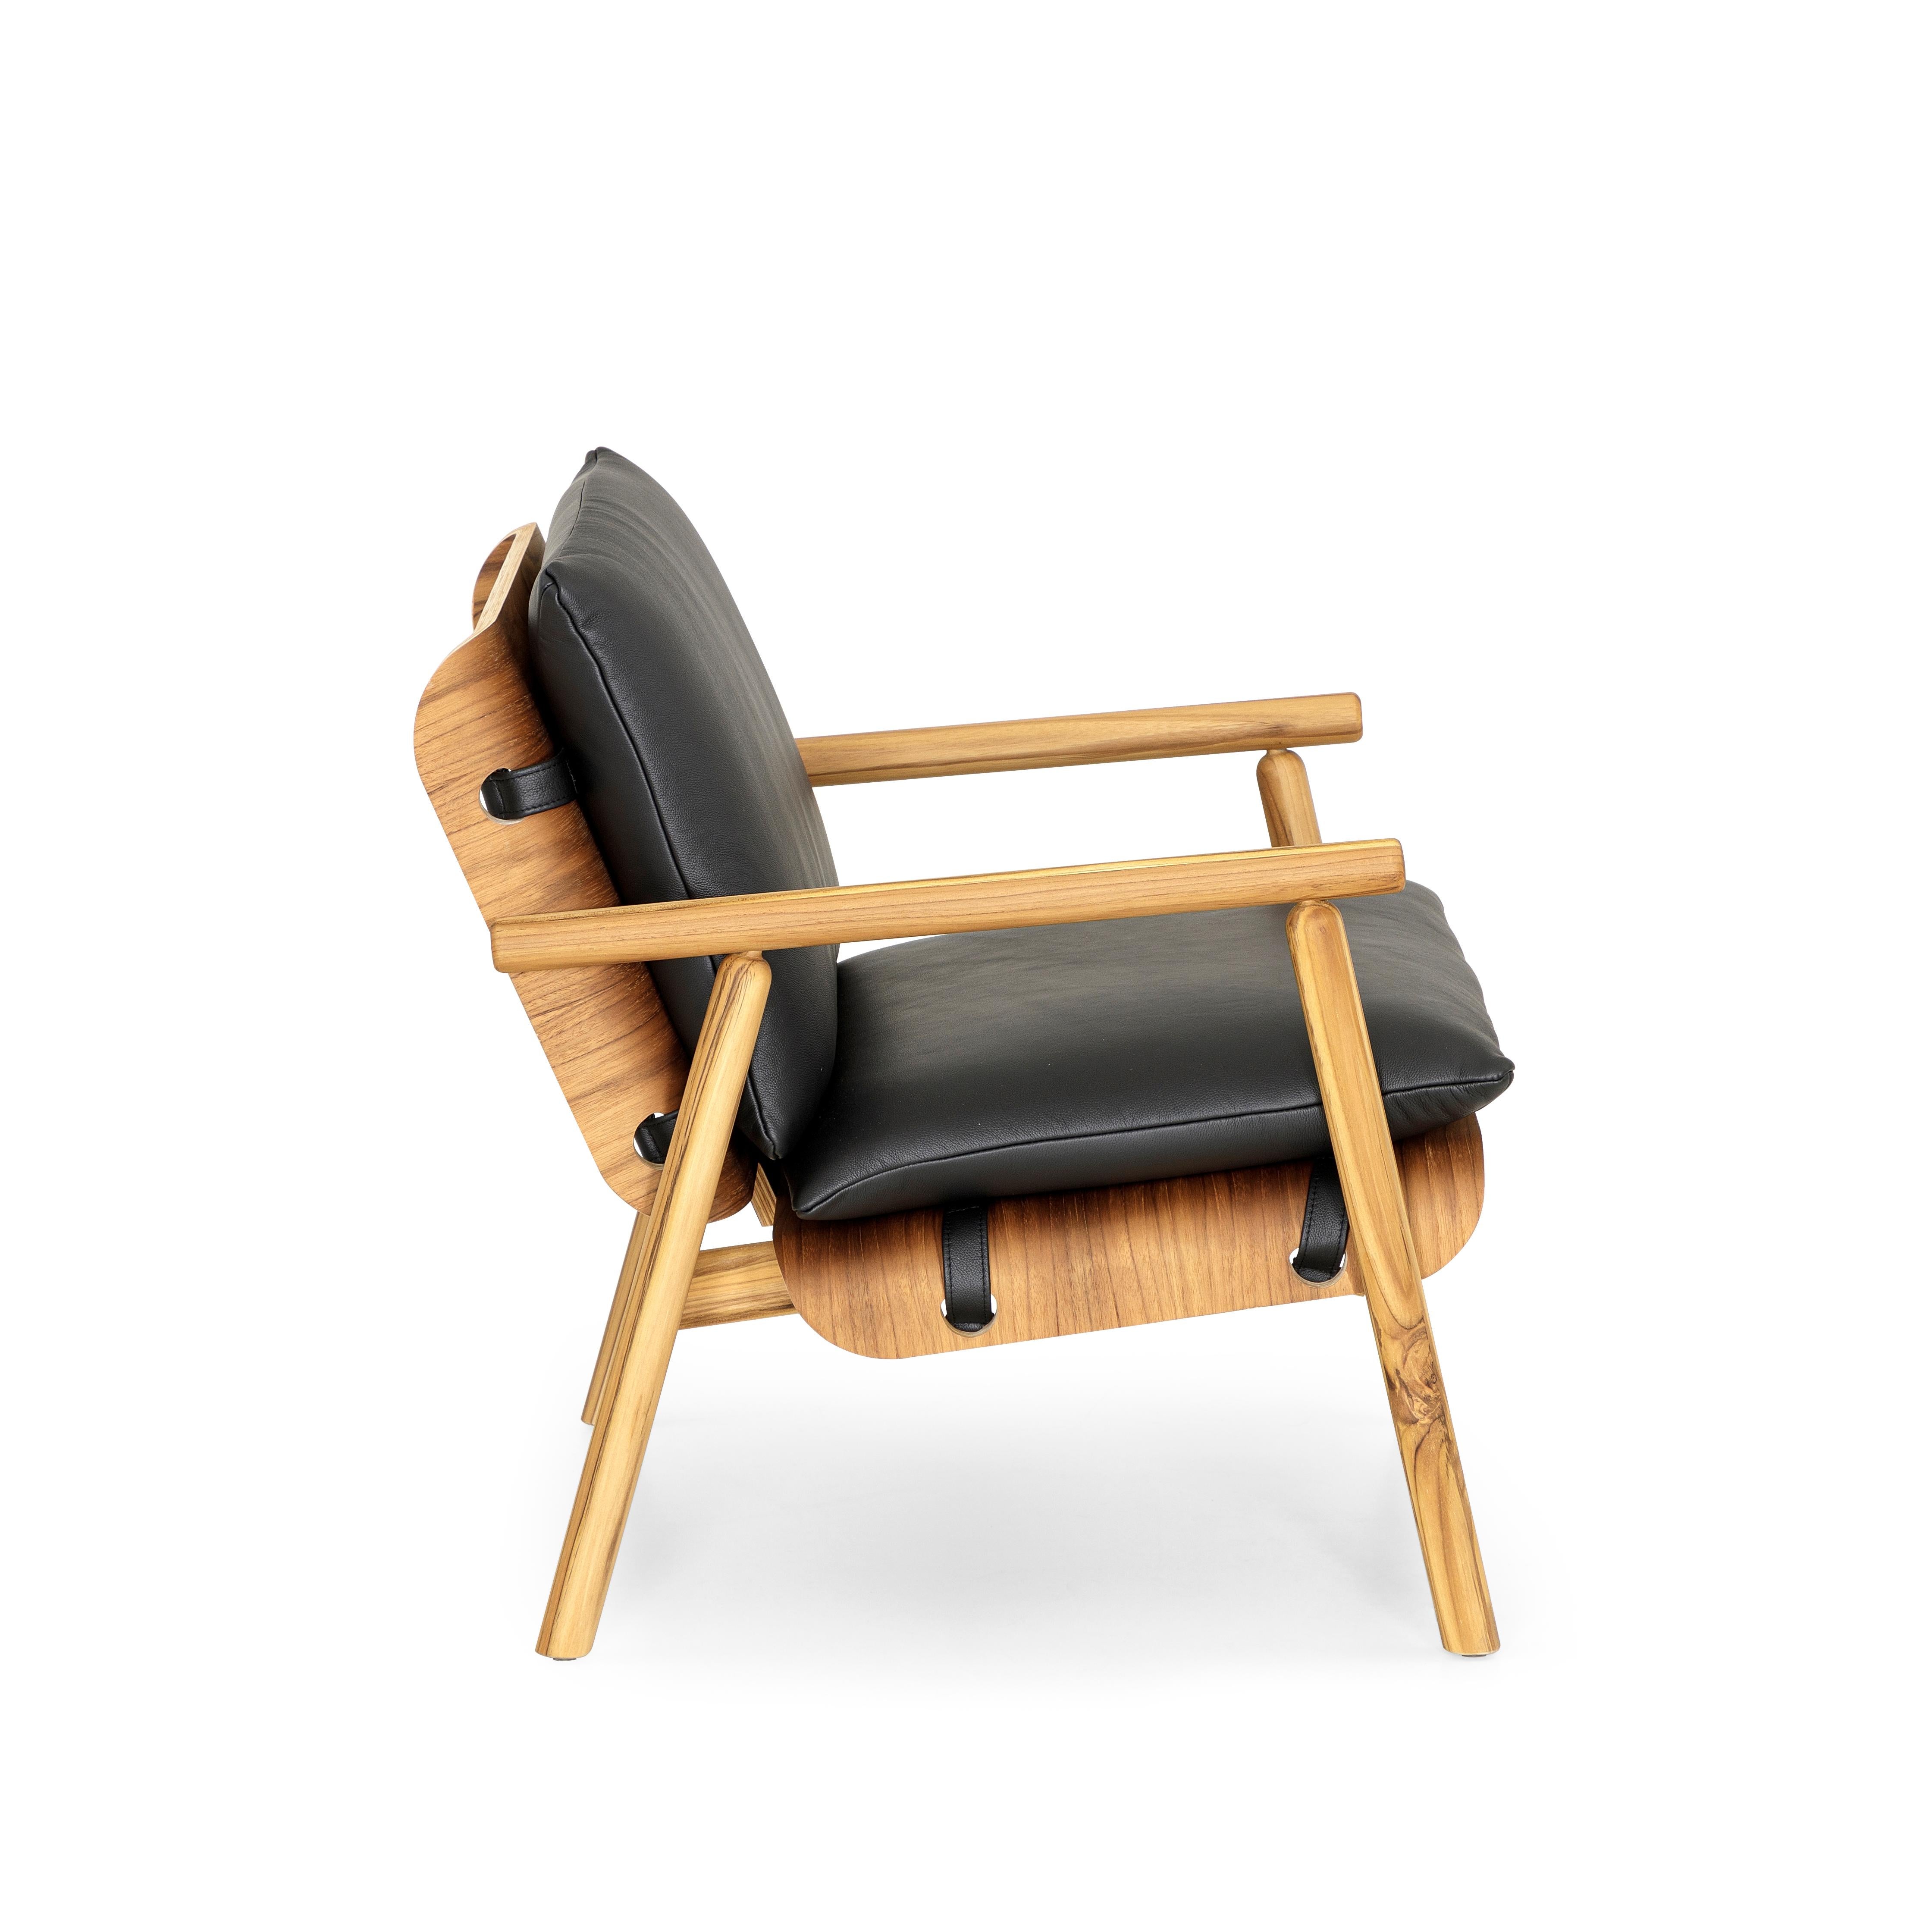 The Tai armchair has a lot going on but in a very simplistic way with the beautiful wood frame in a teak finish and its black leather cushions. The unique 